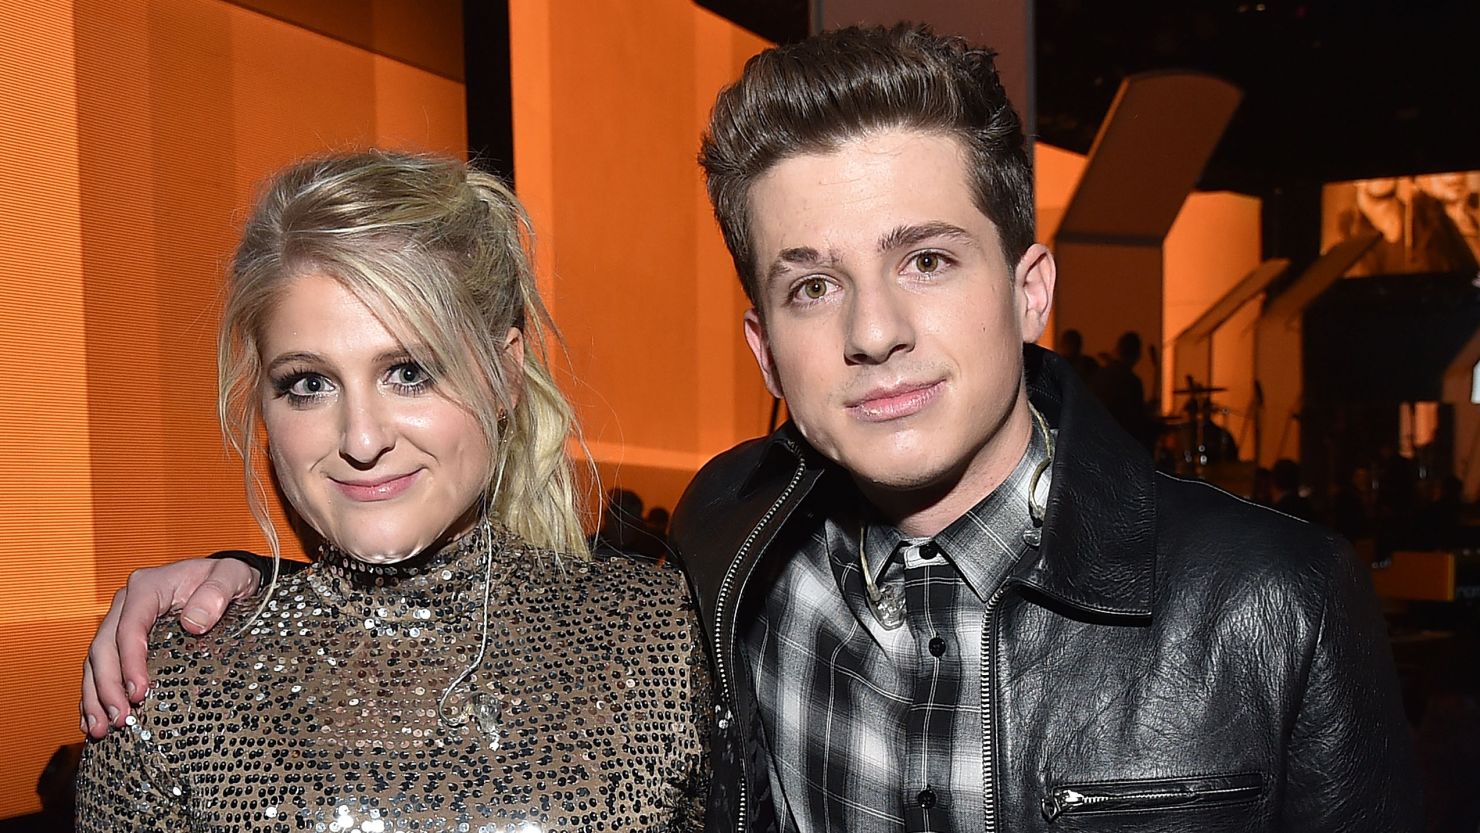 Meghan Trainor (L) and Charlie Puth at the 2015 American Music Awards.